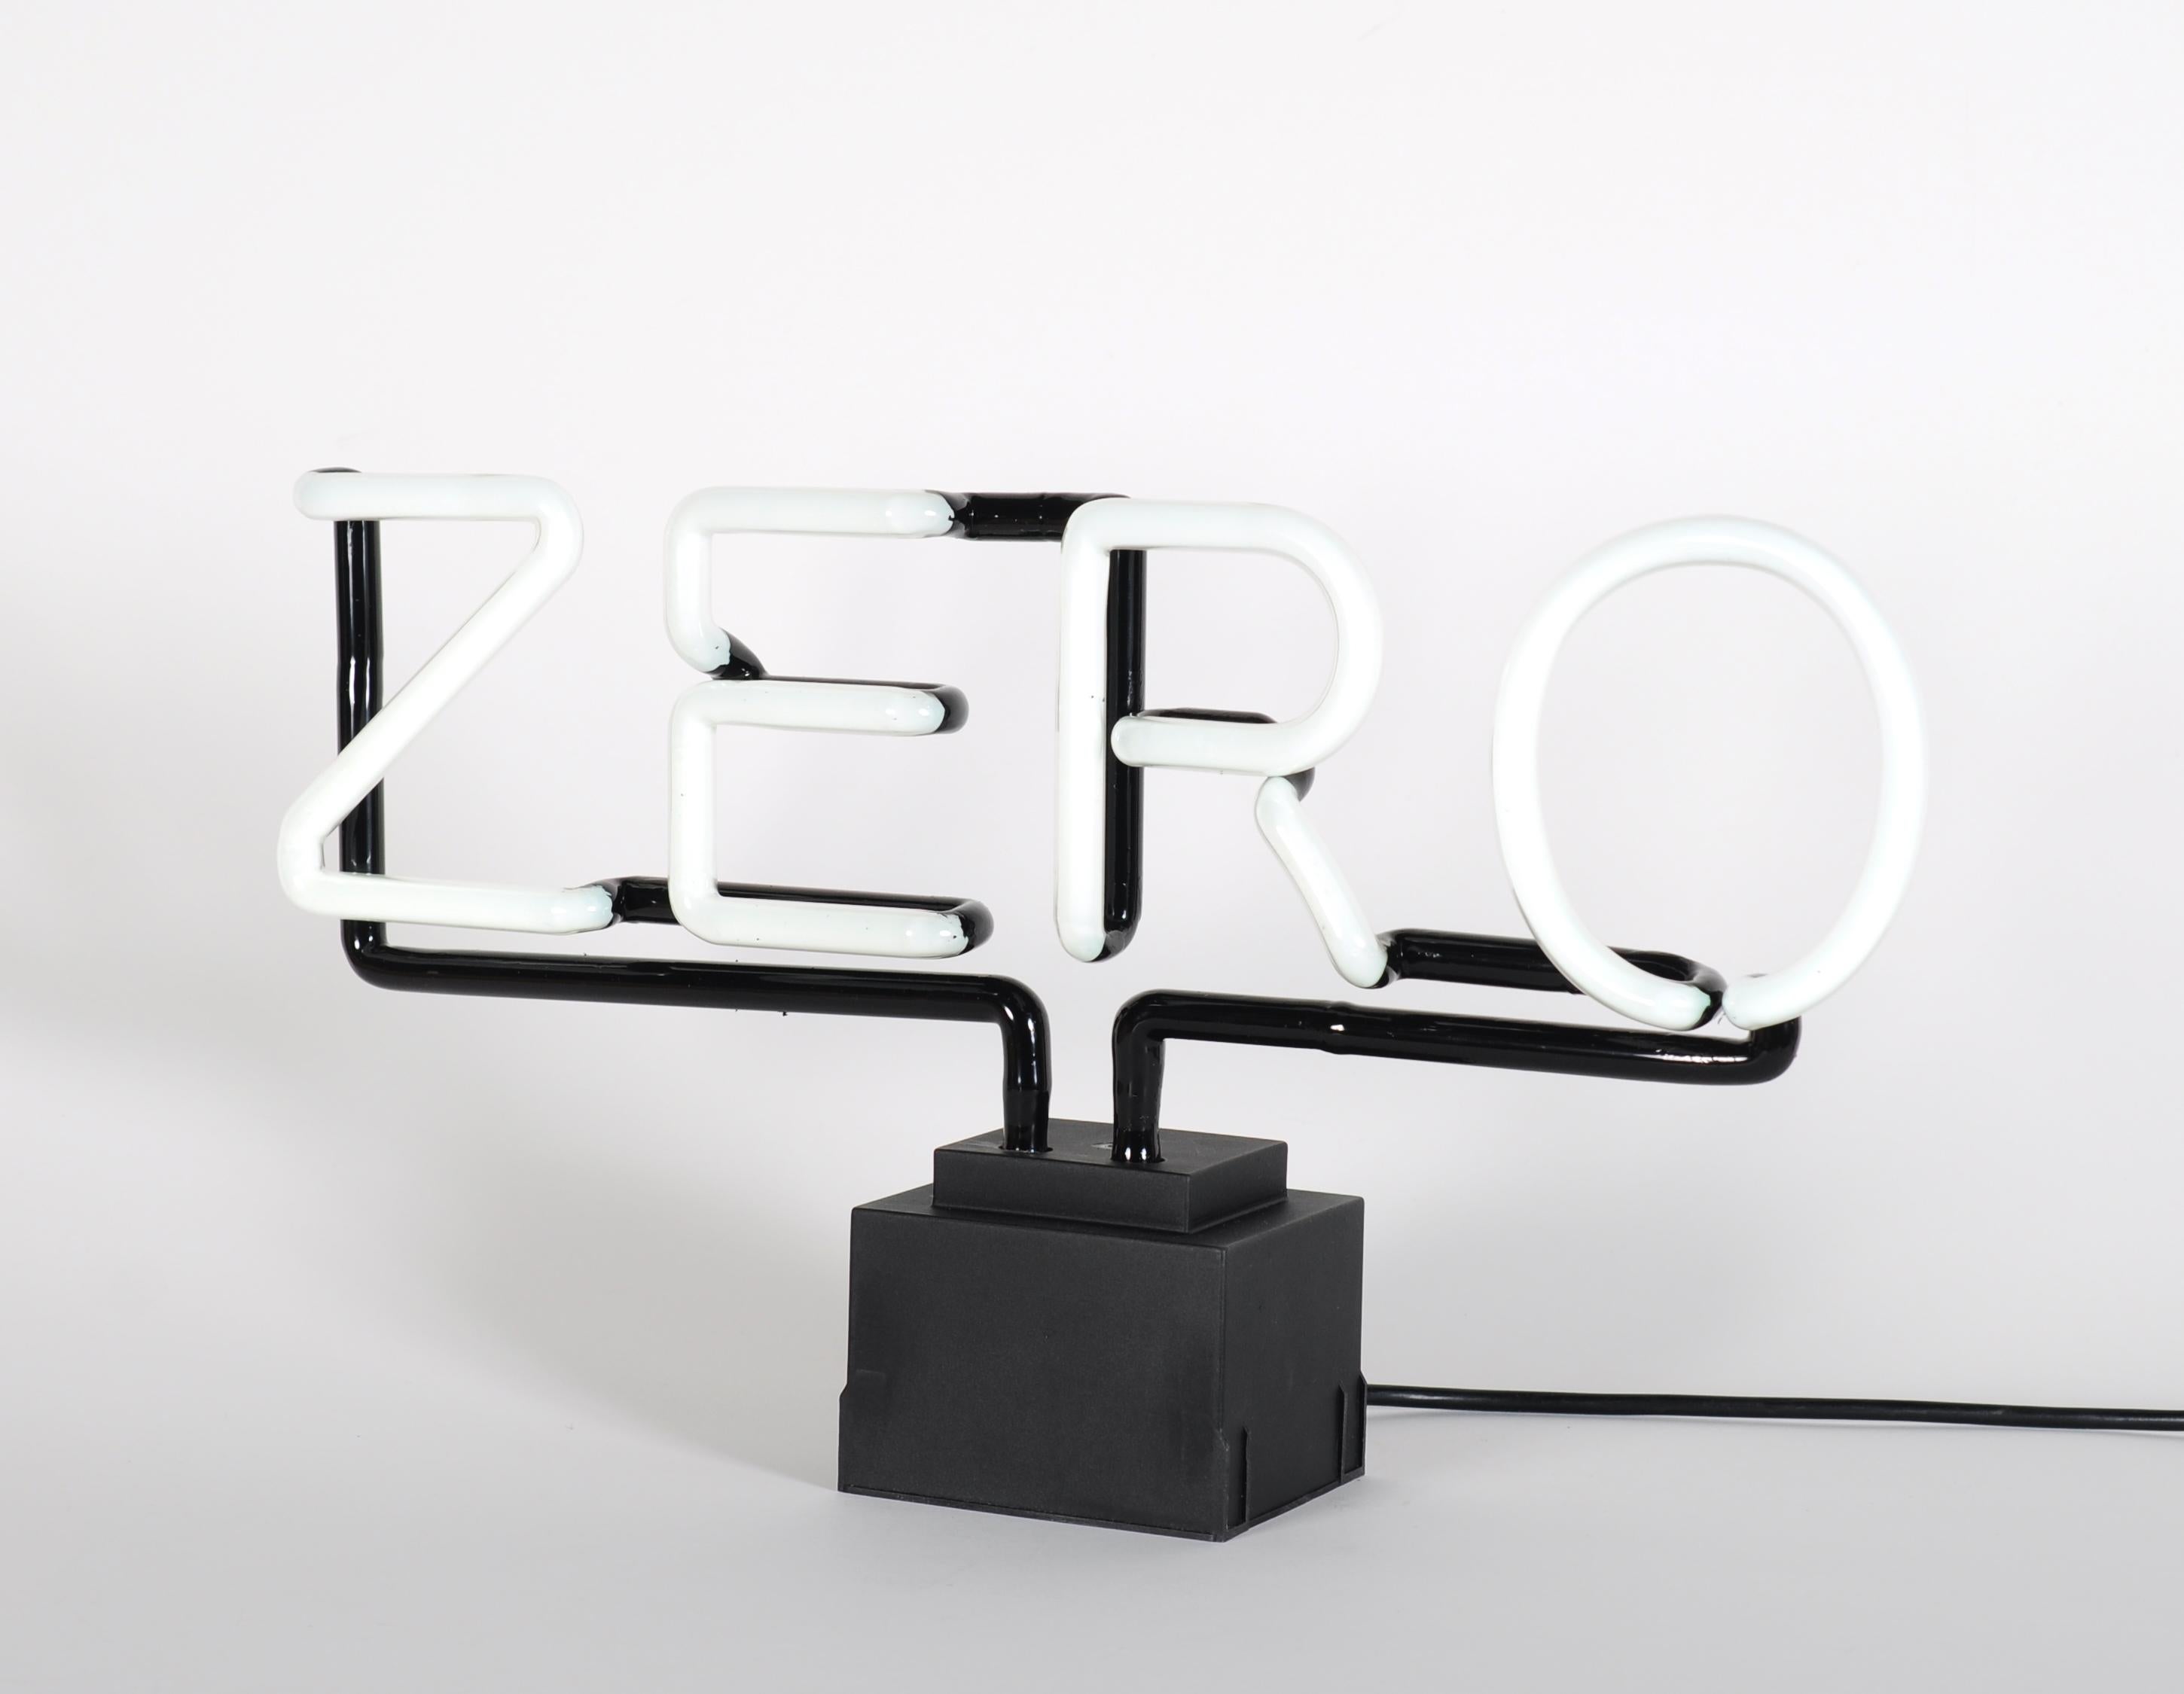 Jan Henderikse, Zero 
Contemporary, 21st Century, Sculpture, Limited Edition, Neon
Neon
Edition of 6
150 x 110 cm (59.1 x 43.3 in.)
Signed and numbered, accompanied by Certificate of Authenticity
In mint condition

PLEASE NOTE: Edition numbers could